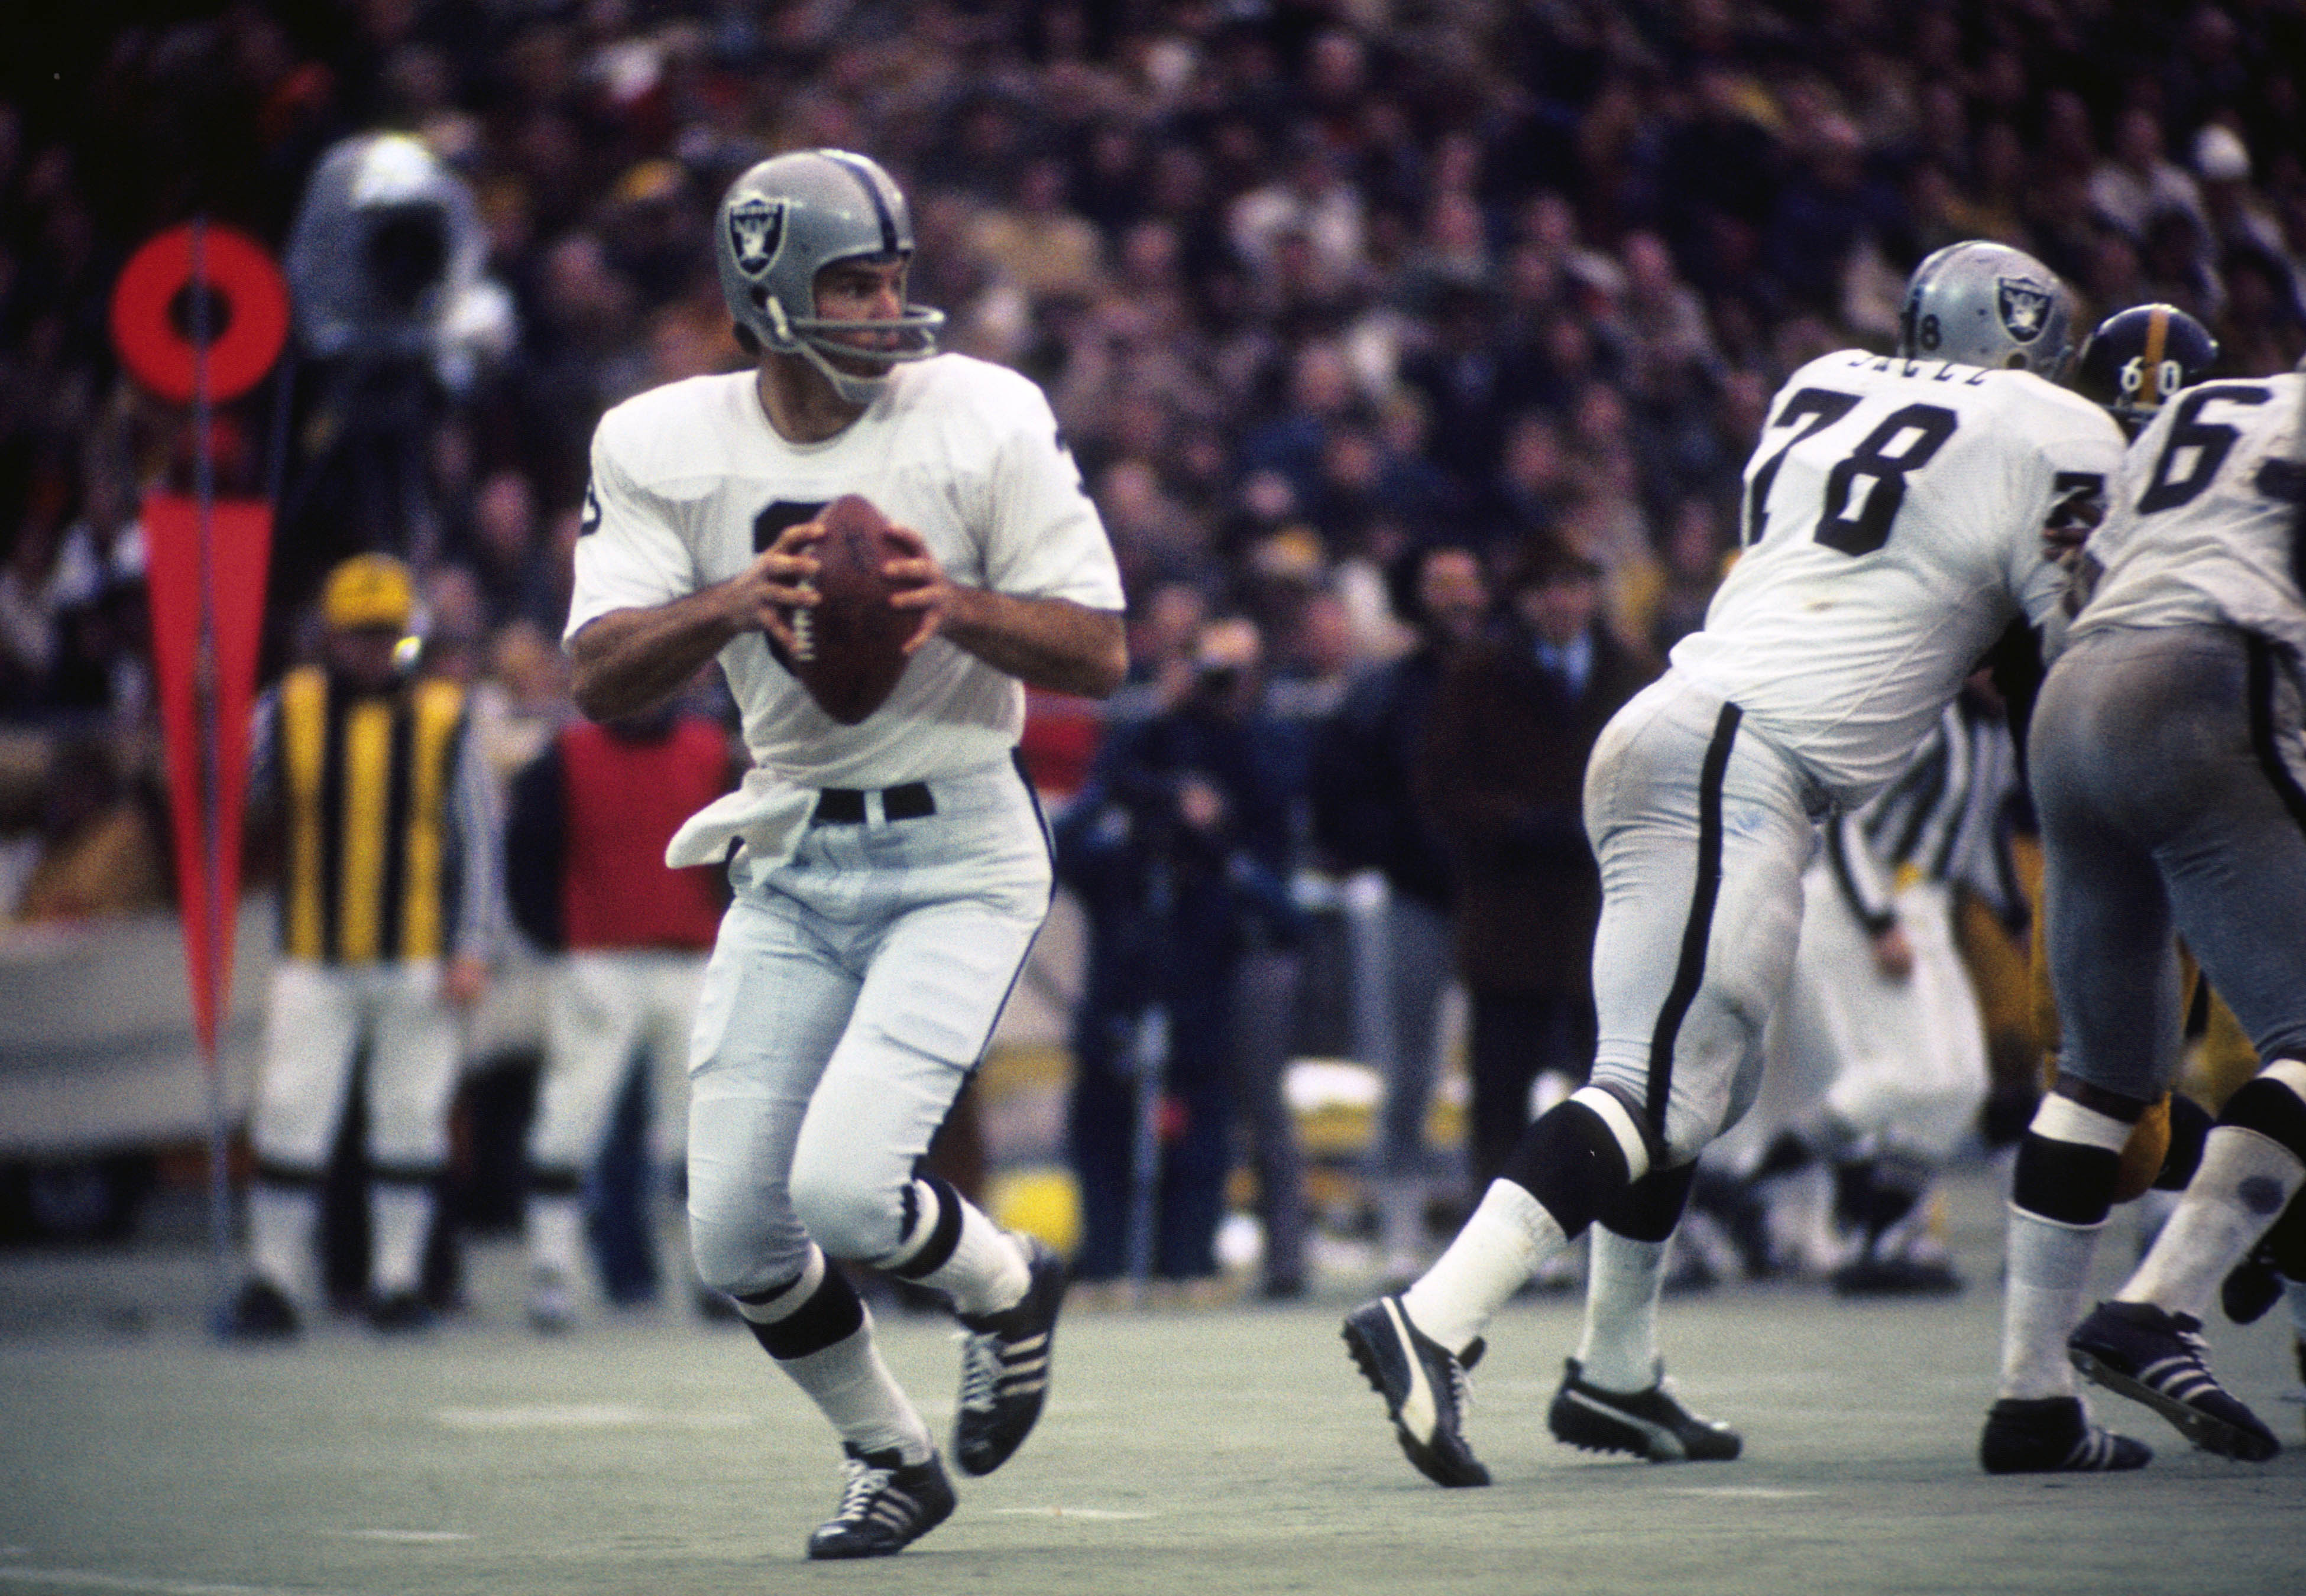 Raiders Commemorate 1967 AFL Championship With Jersey Patch